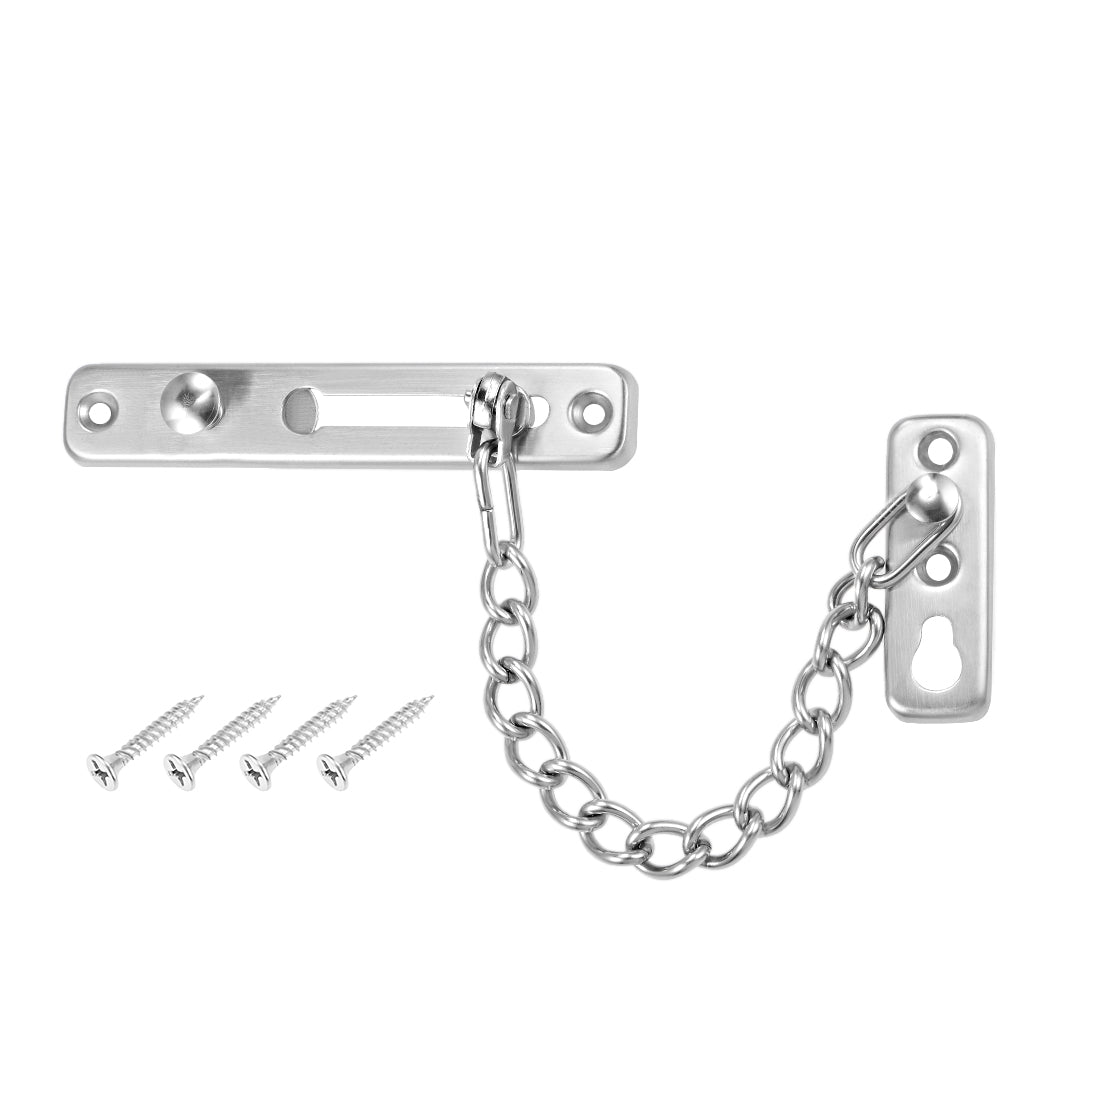 uxcell Uxcell Chain Door Guard Lock Security Safety Latch Lock with Spring Anti-Theft Press Lock Silver